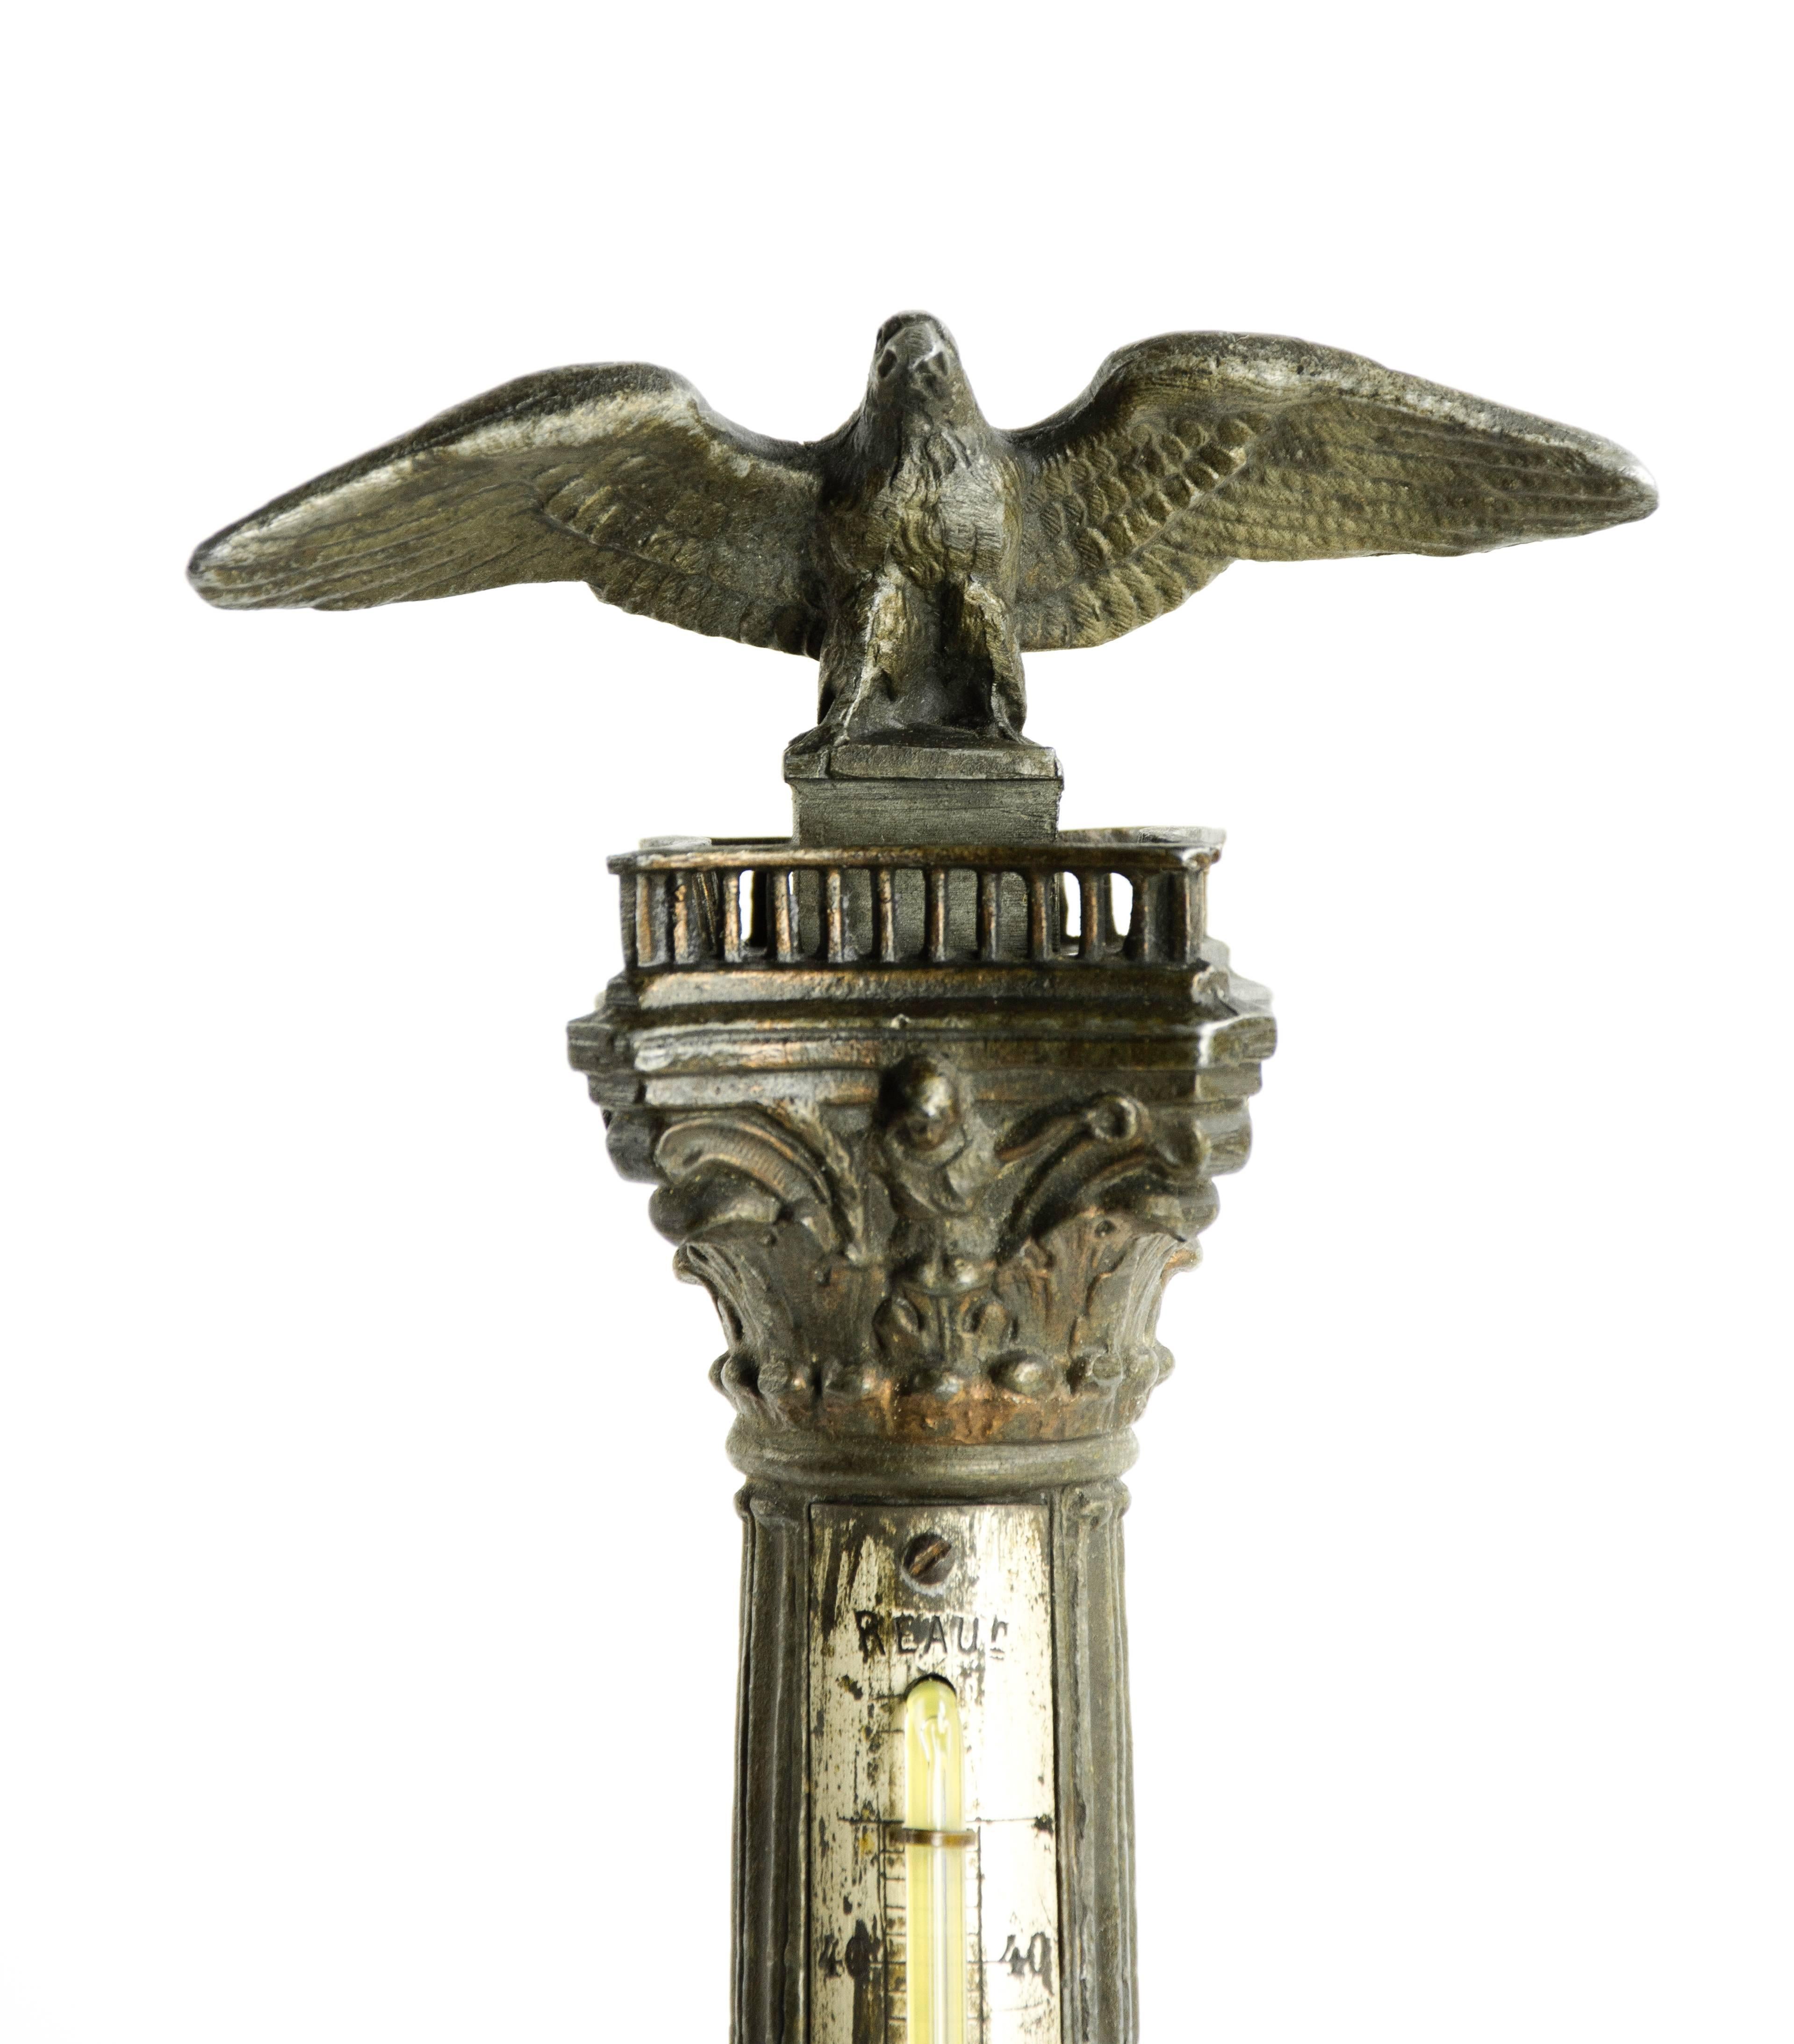 Scarce Invalidensaule Monument Model with Thermometer, circa 1854, Berlin For Sale 3